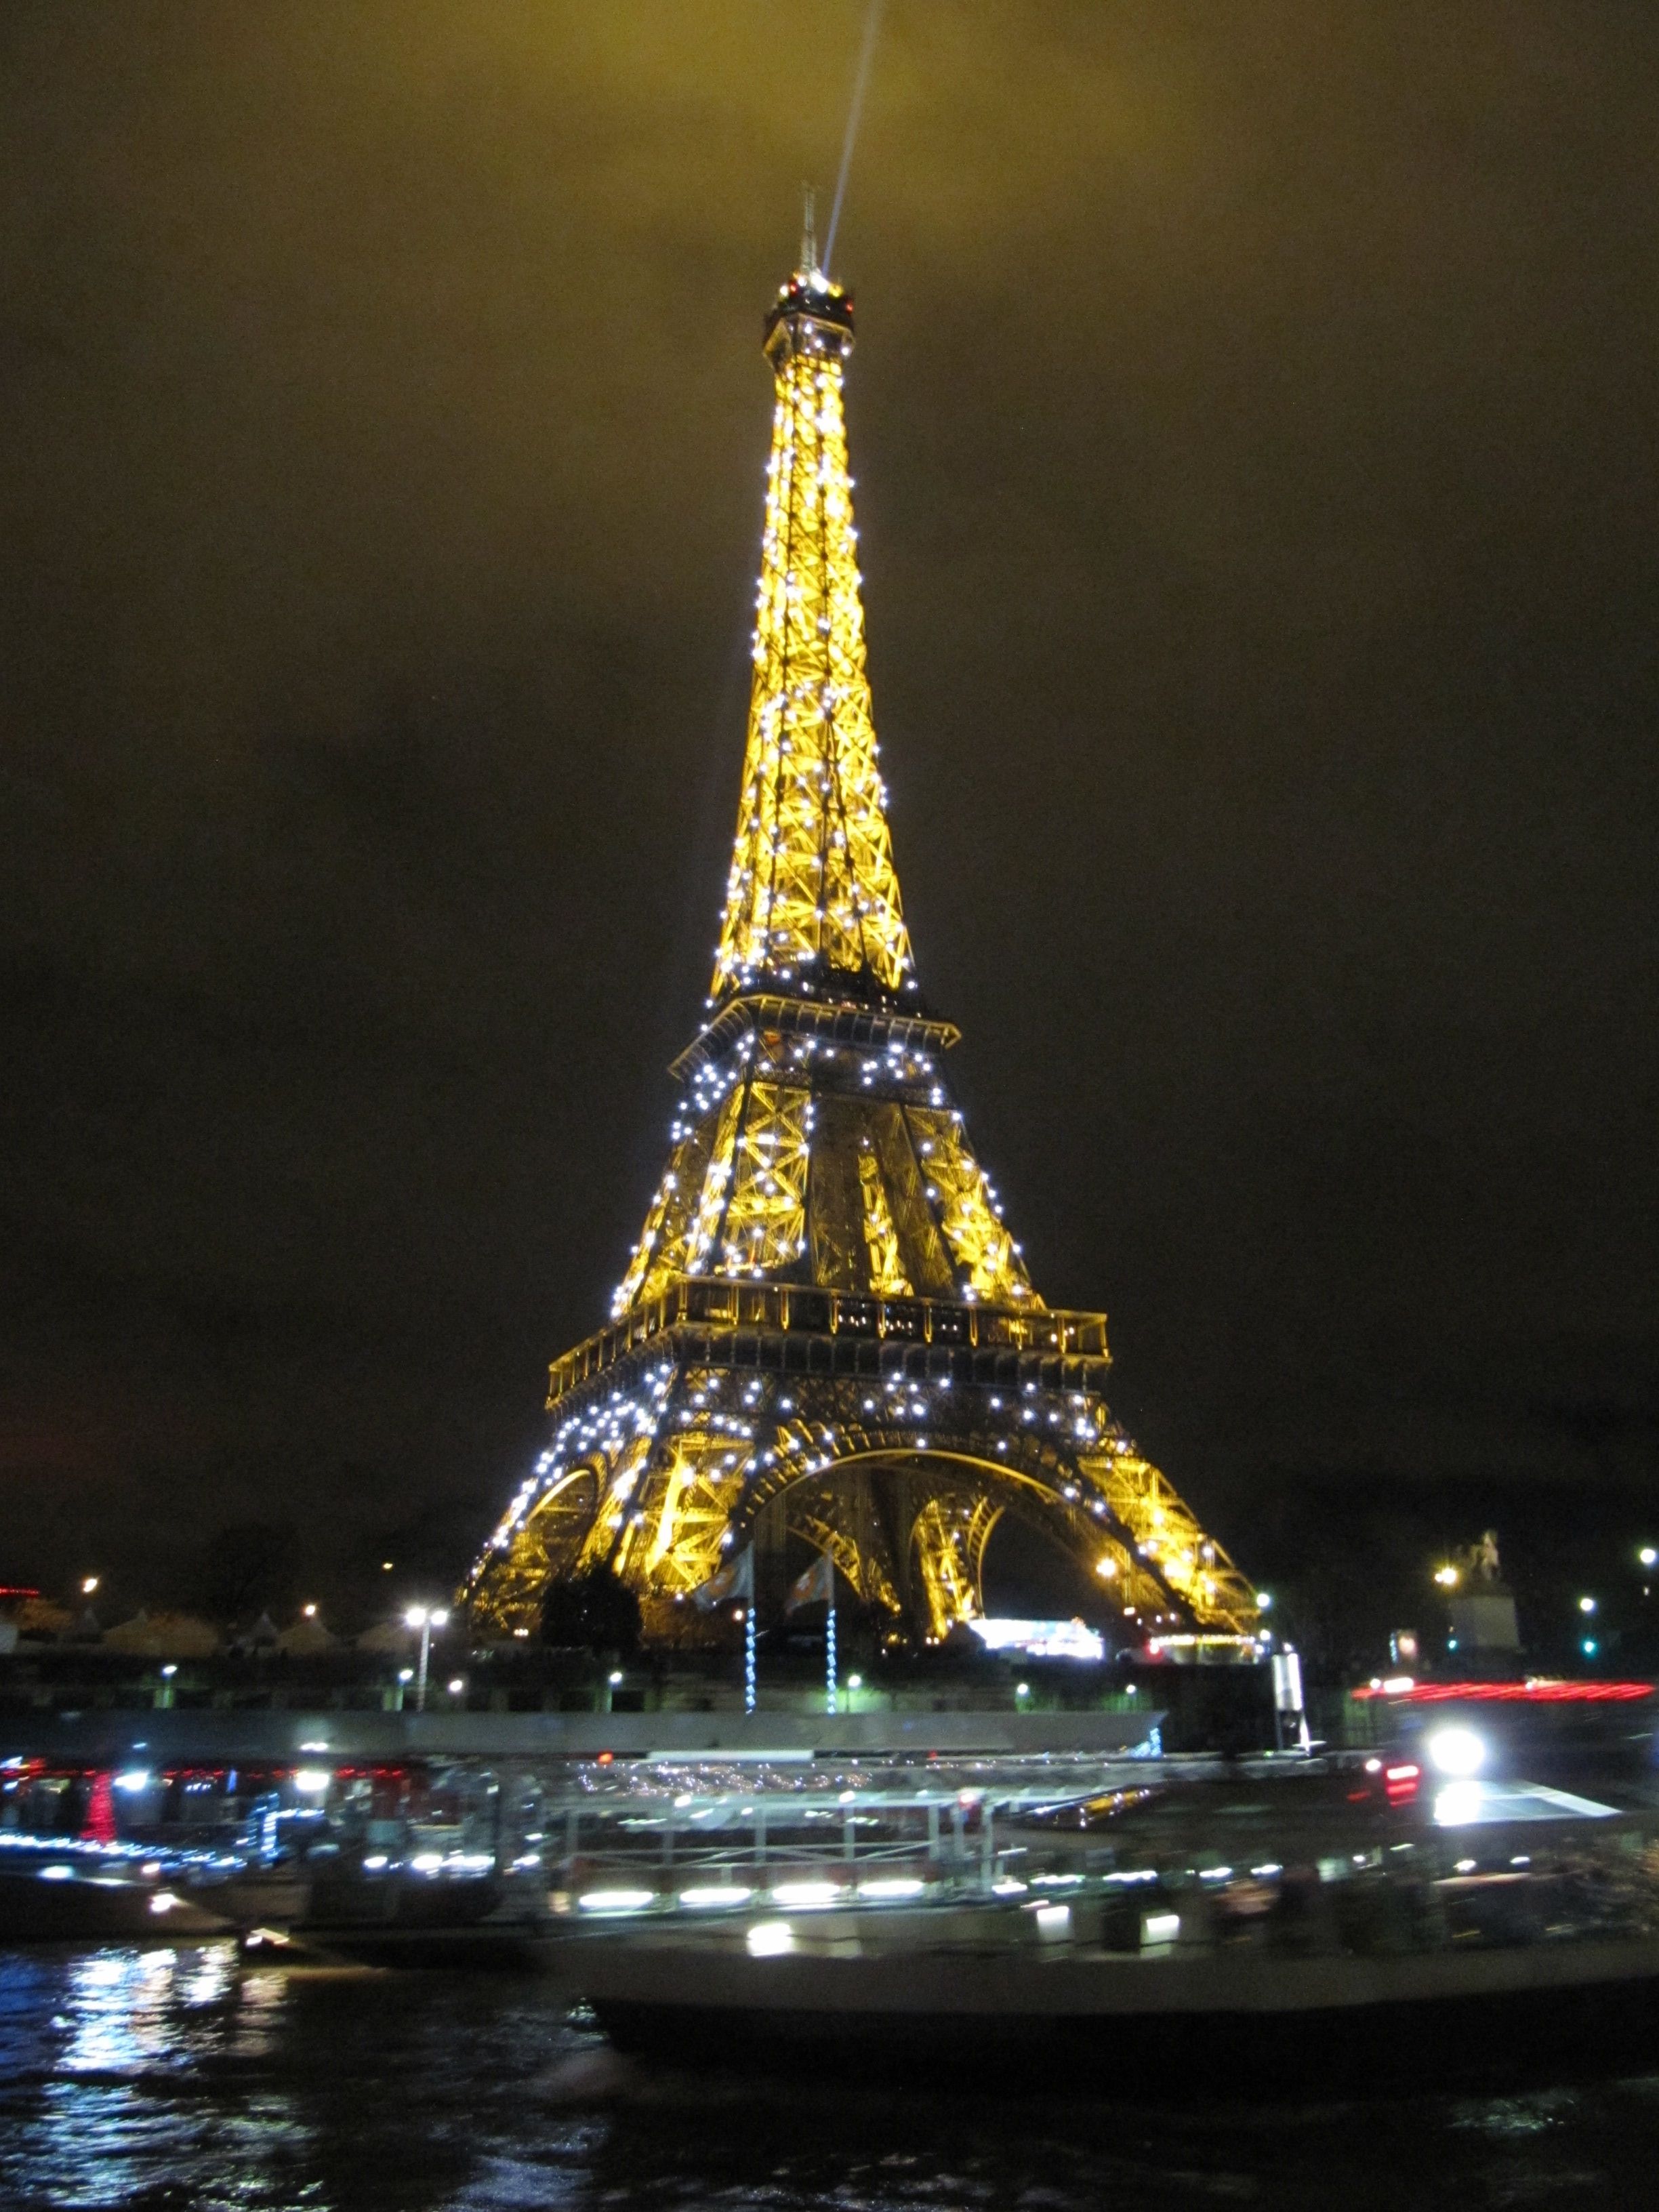 The Eiffel Tower shining on New Year's Eve